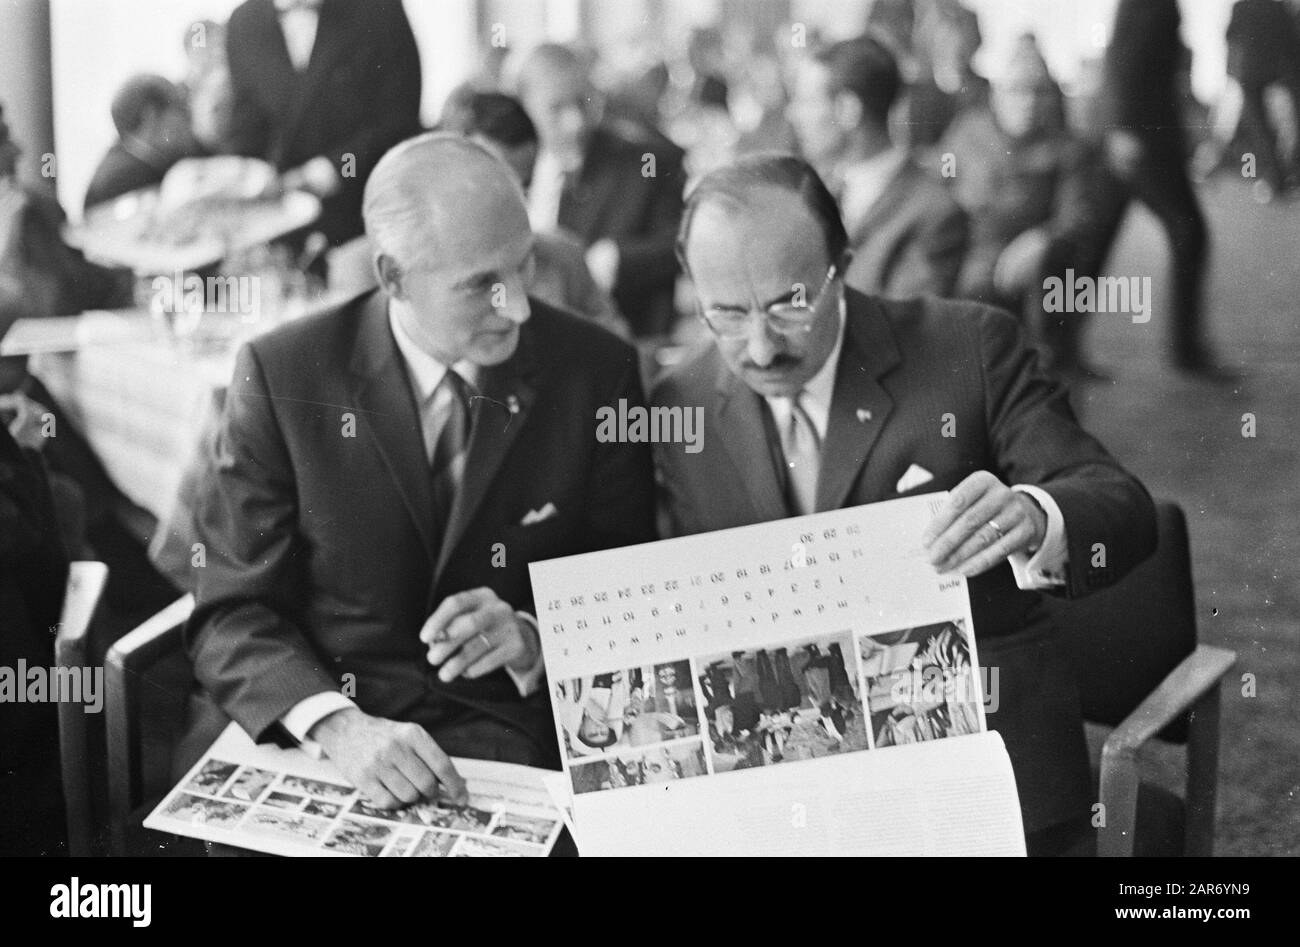 New Mission calendar, introduced by Minister of State mr. Cals. Mr. Bot and Mr. Cals browse calendar Date: September 25, 1967 Keywords: CALENDERS Personname: Bot, mr., Cals, Jo Stock Photo